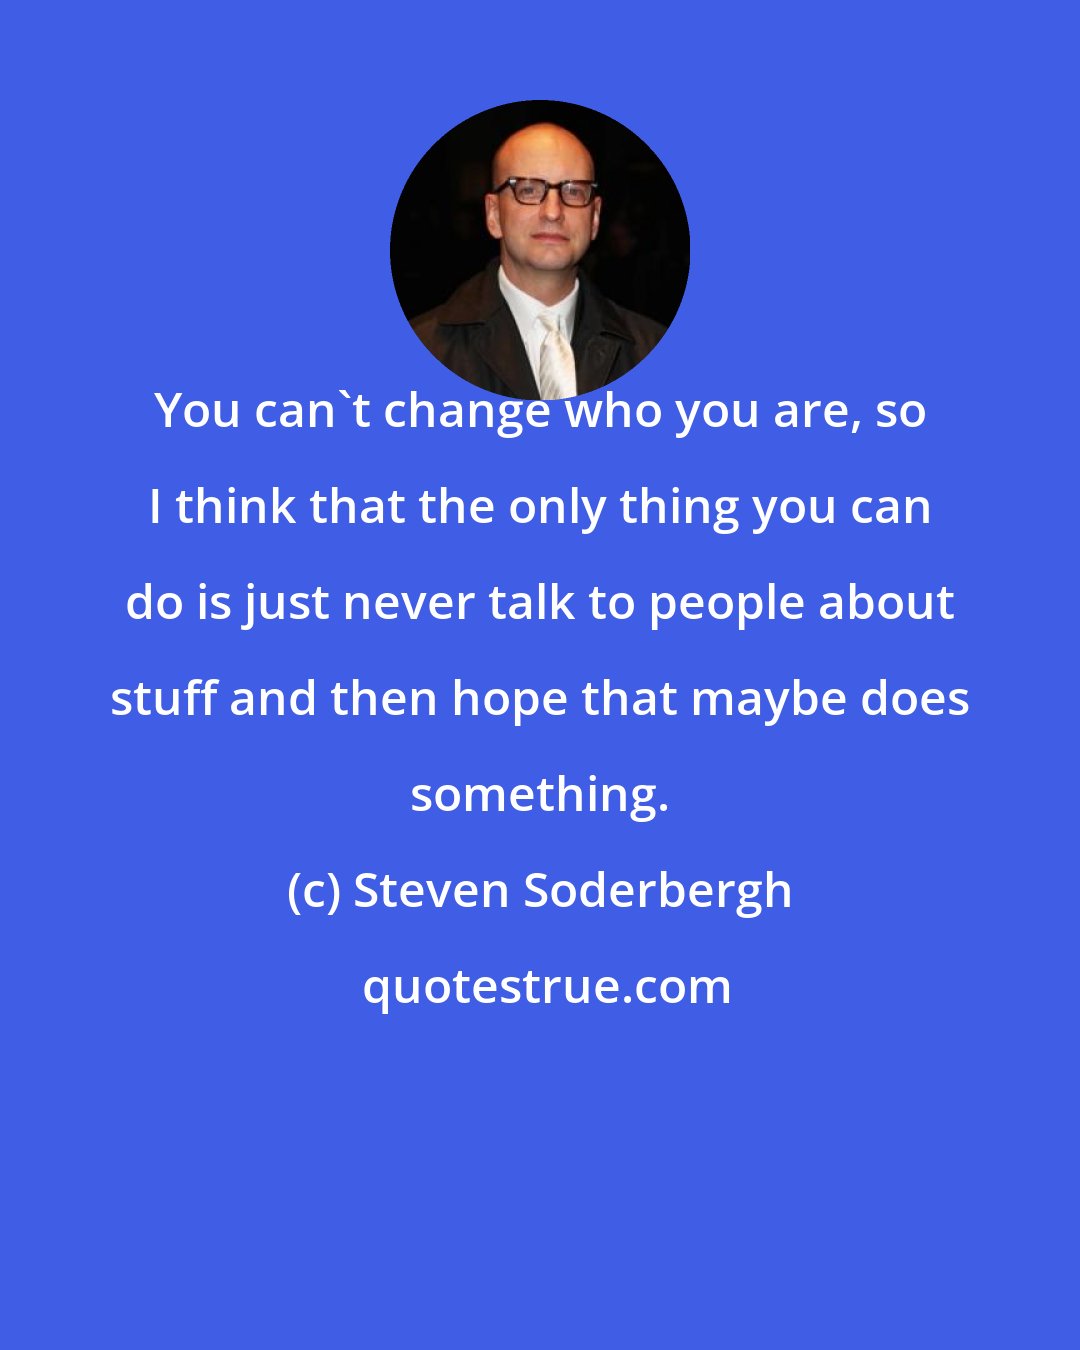 Steven Soderbergh: You can't change who you are, so I think that the only thing you can do is just never talk to people about stuff and then hope that maybe does something.